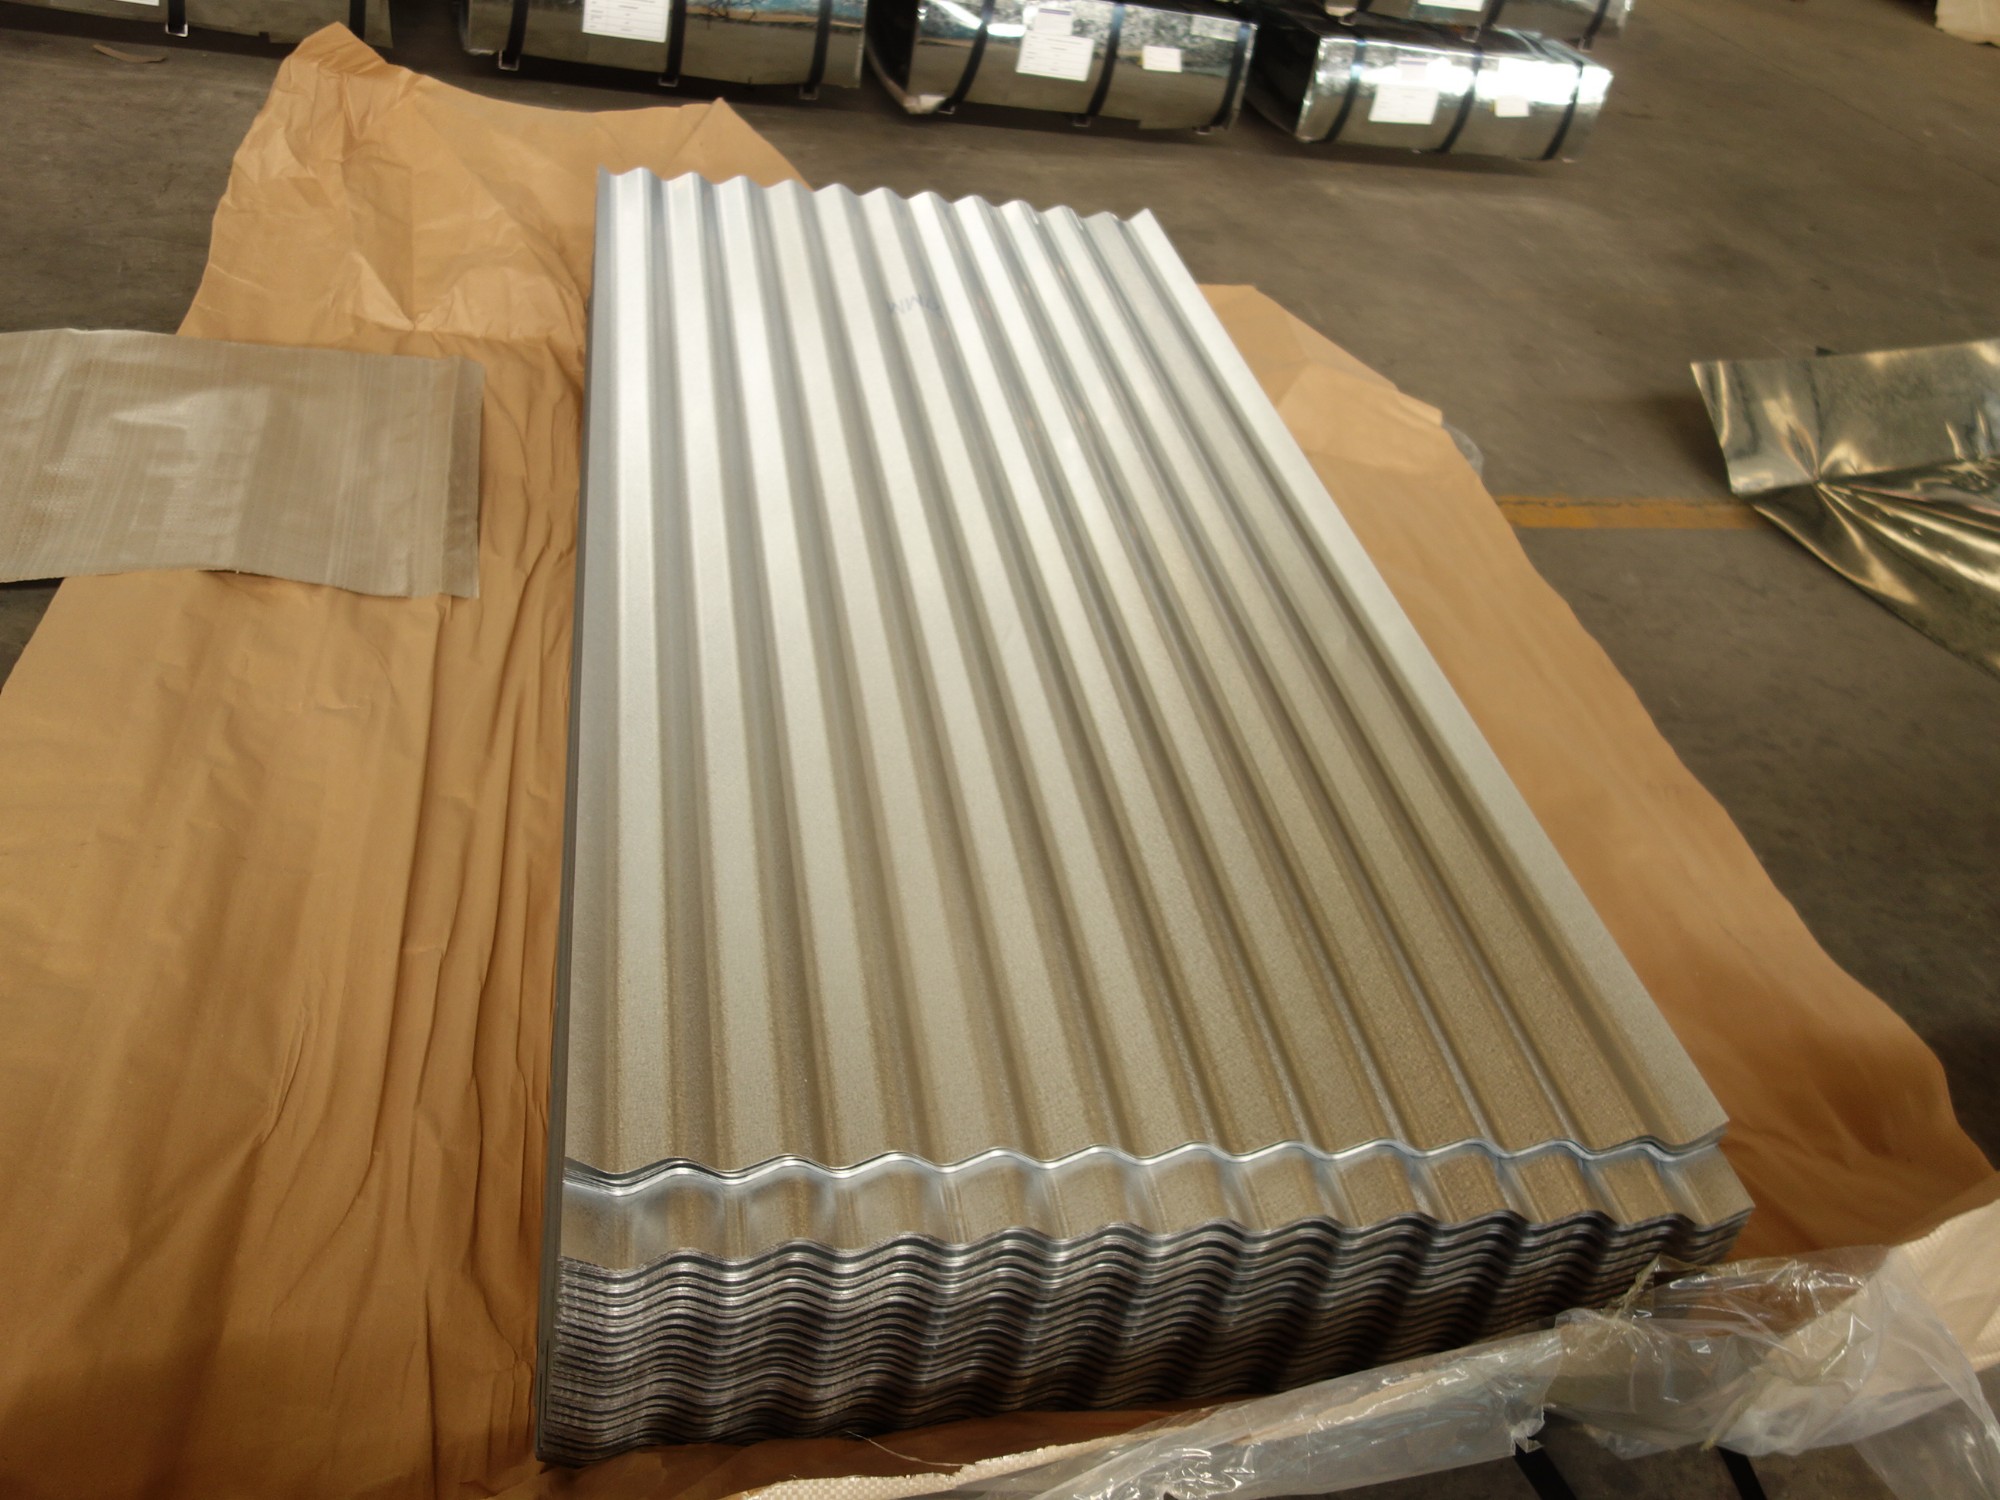 Gi Roof Sheets Manufacturers, Gi Roof Sheets Factory, Supply Gi Roof Sheets